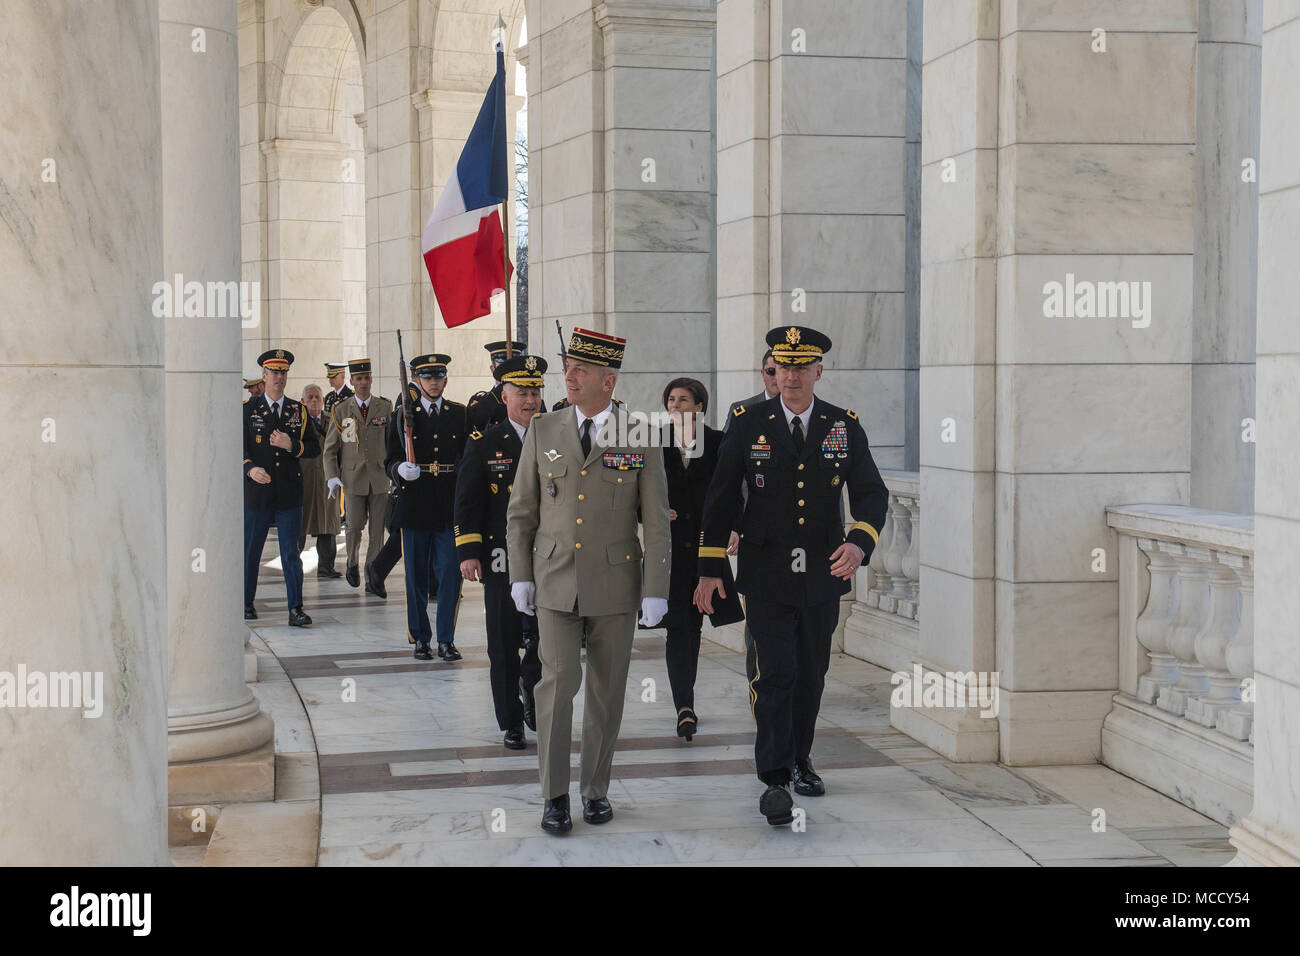 Maj. Gen. John P. Sullivan, assistant deputy chief of staff, G-4 U.S. Army guides Chief of the Defence Staff of the French Army François Lecointre on a tour of the Arlington Memorial Ampitheater Arlington National Cemetery, in Arlington, Virginia, Feb. 12, 2018 (U.S. Army photo by Zane Ecklund). Stock Photo